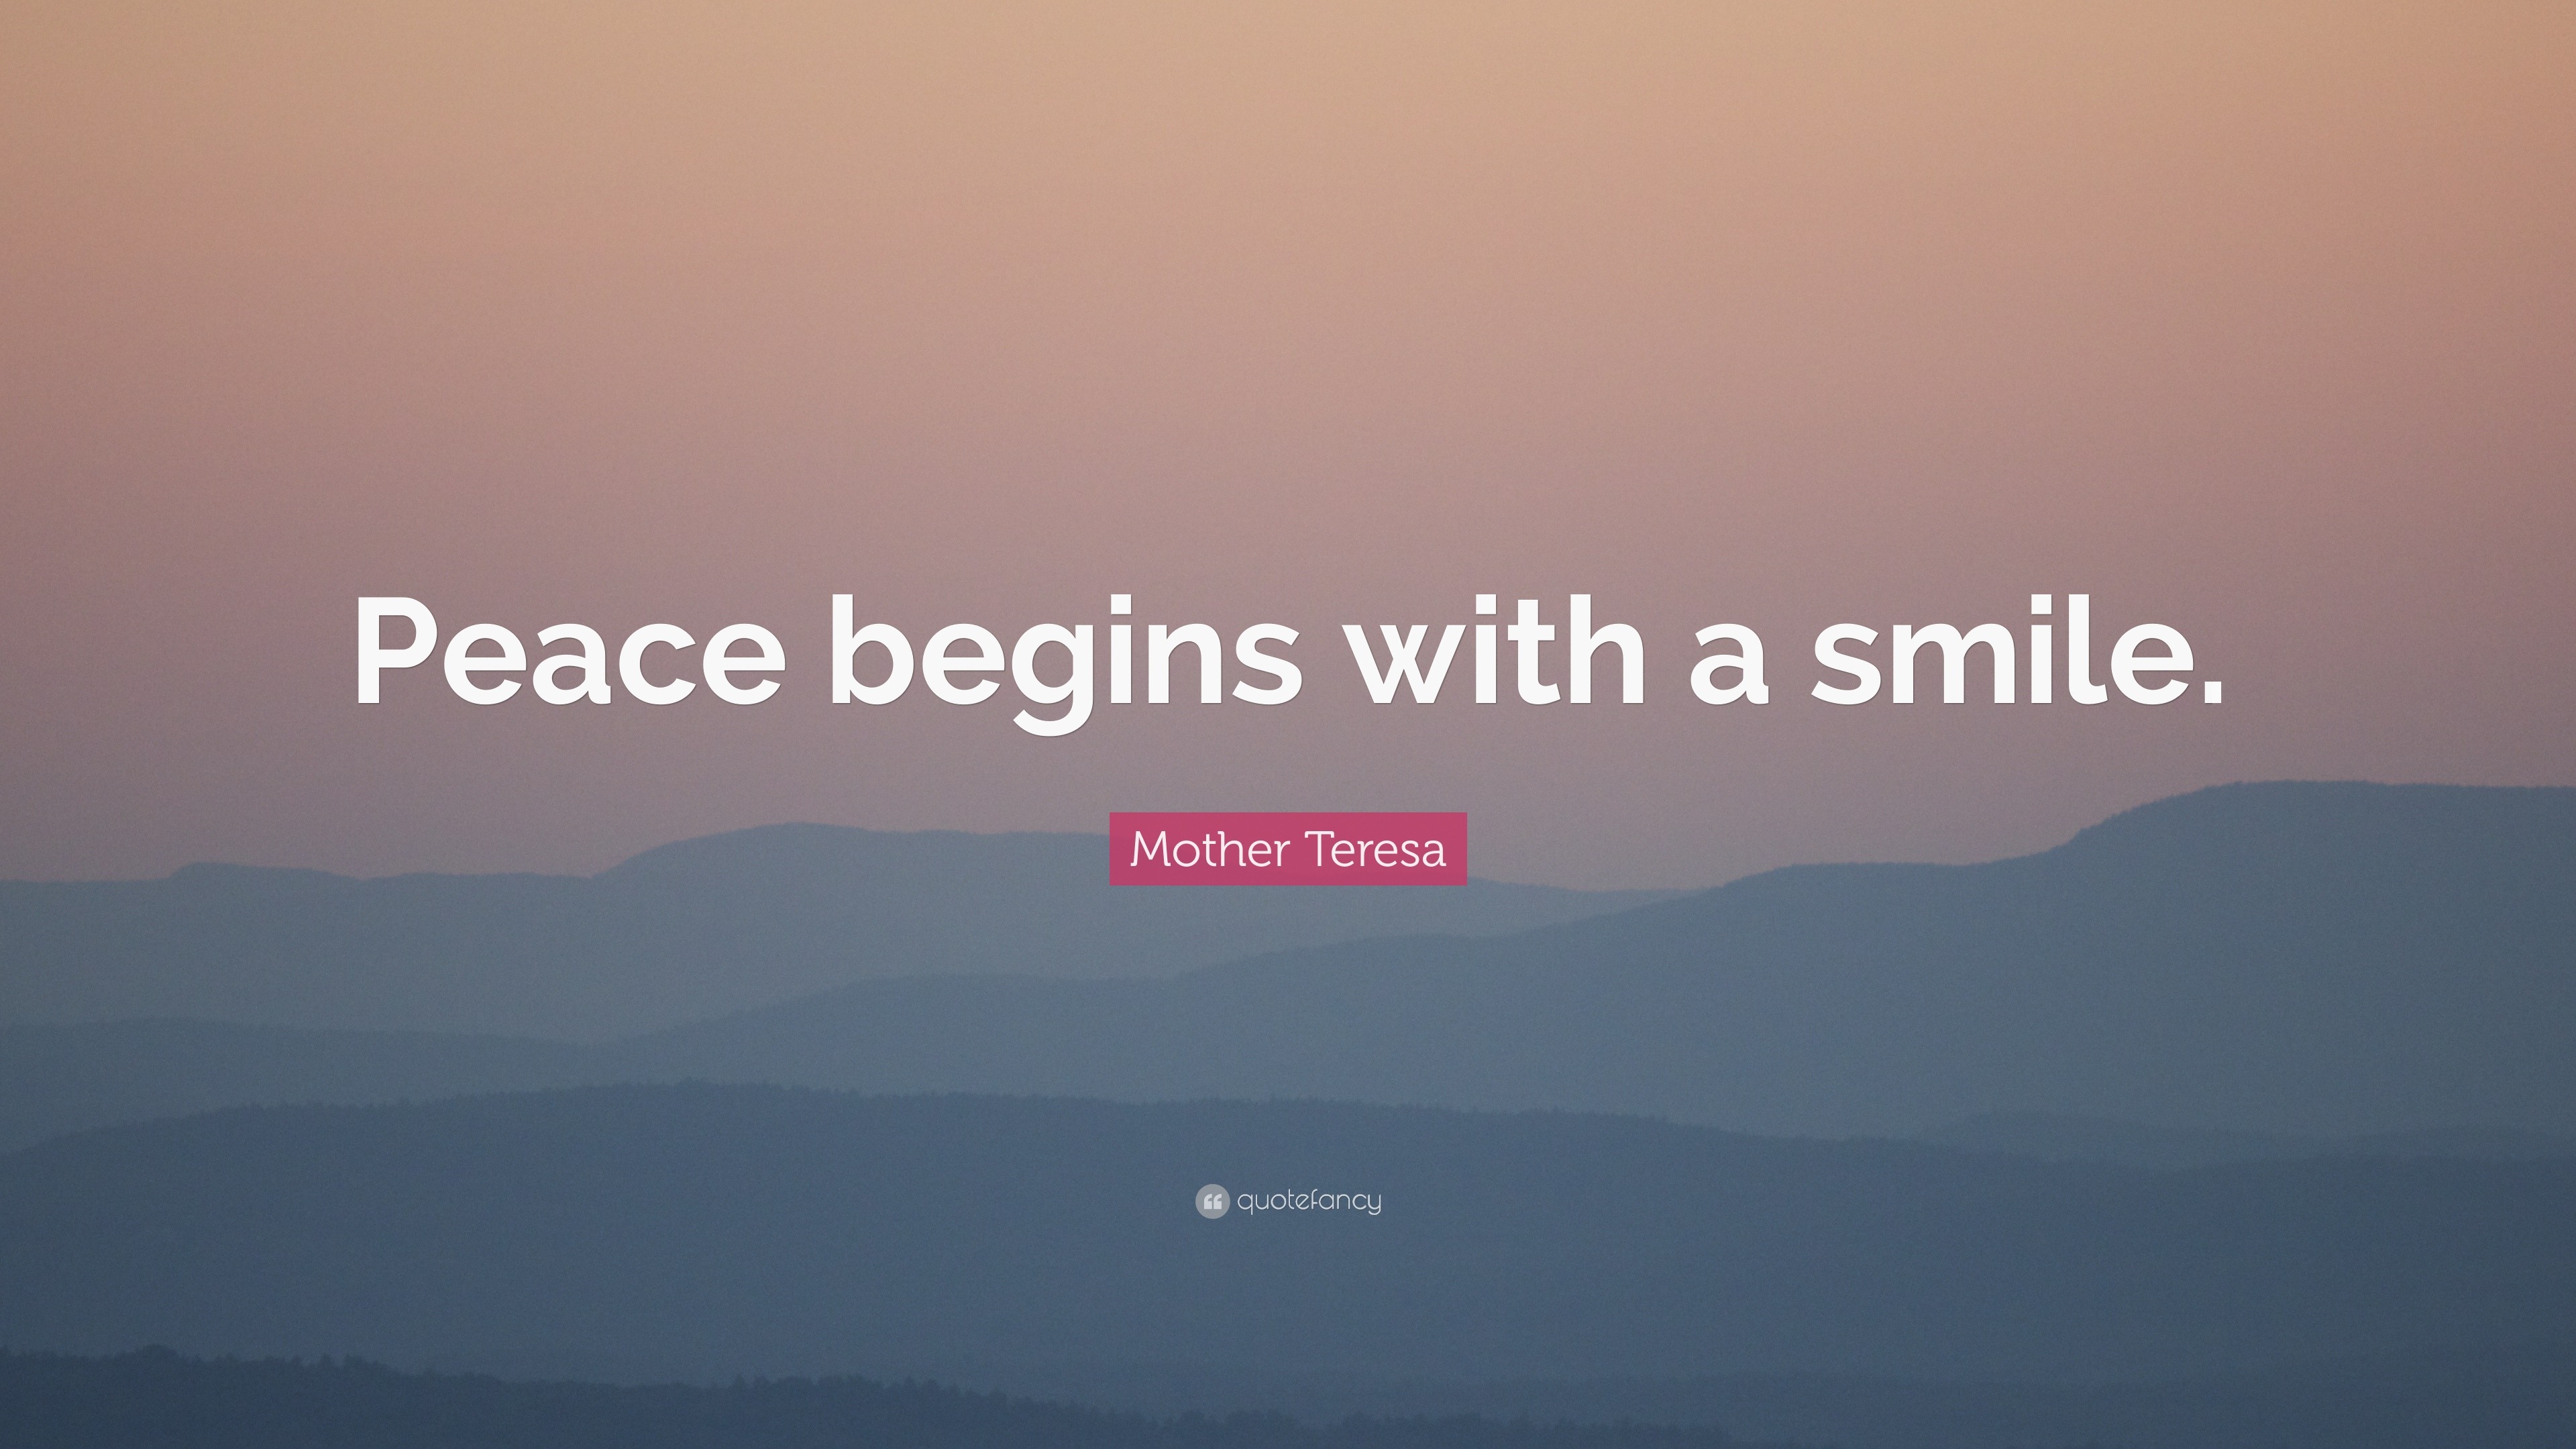 peace begins with a smile essay